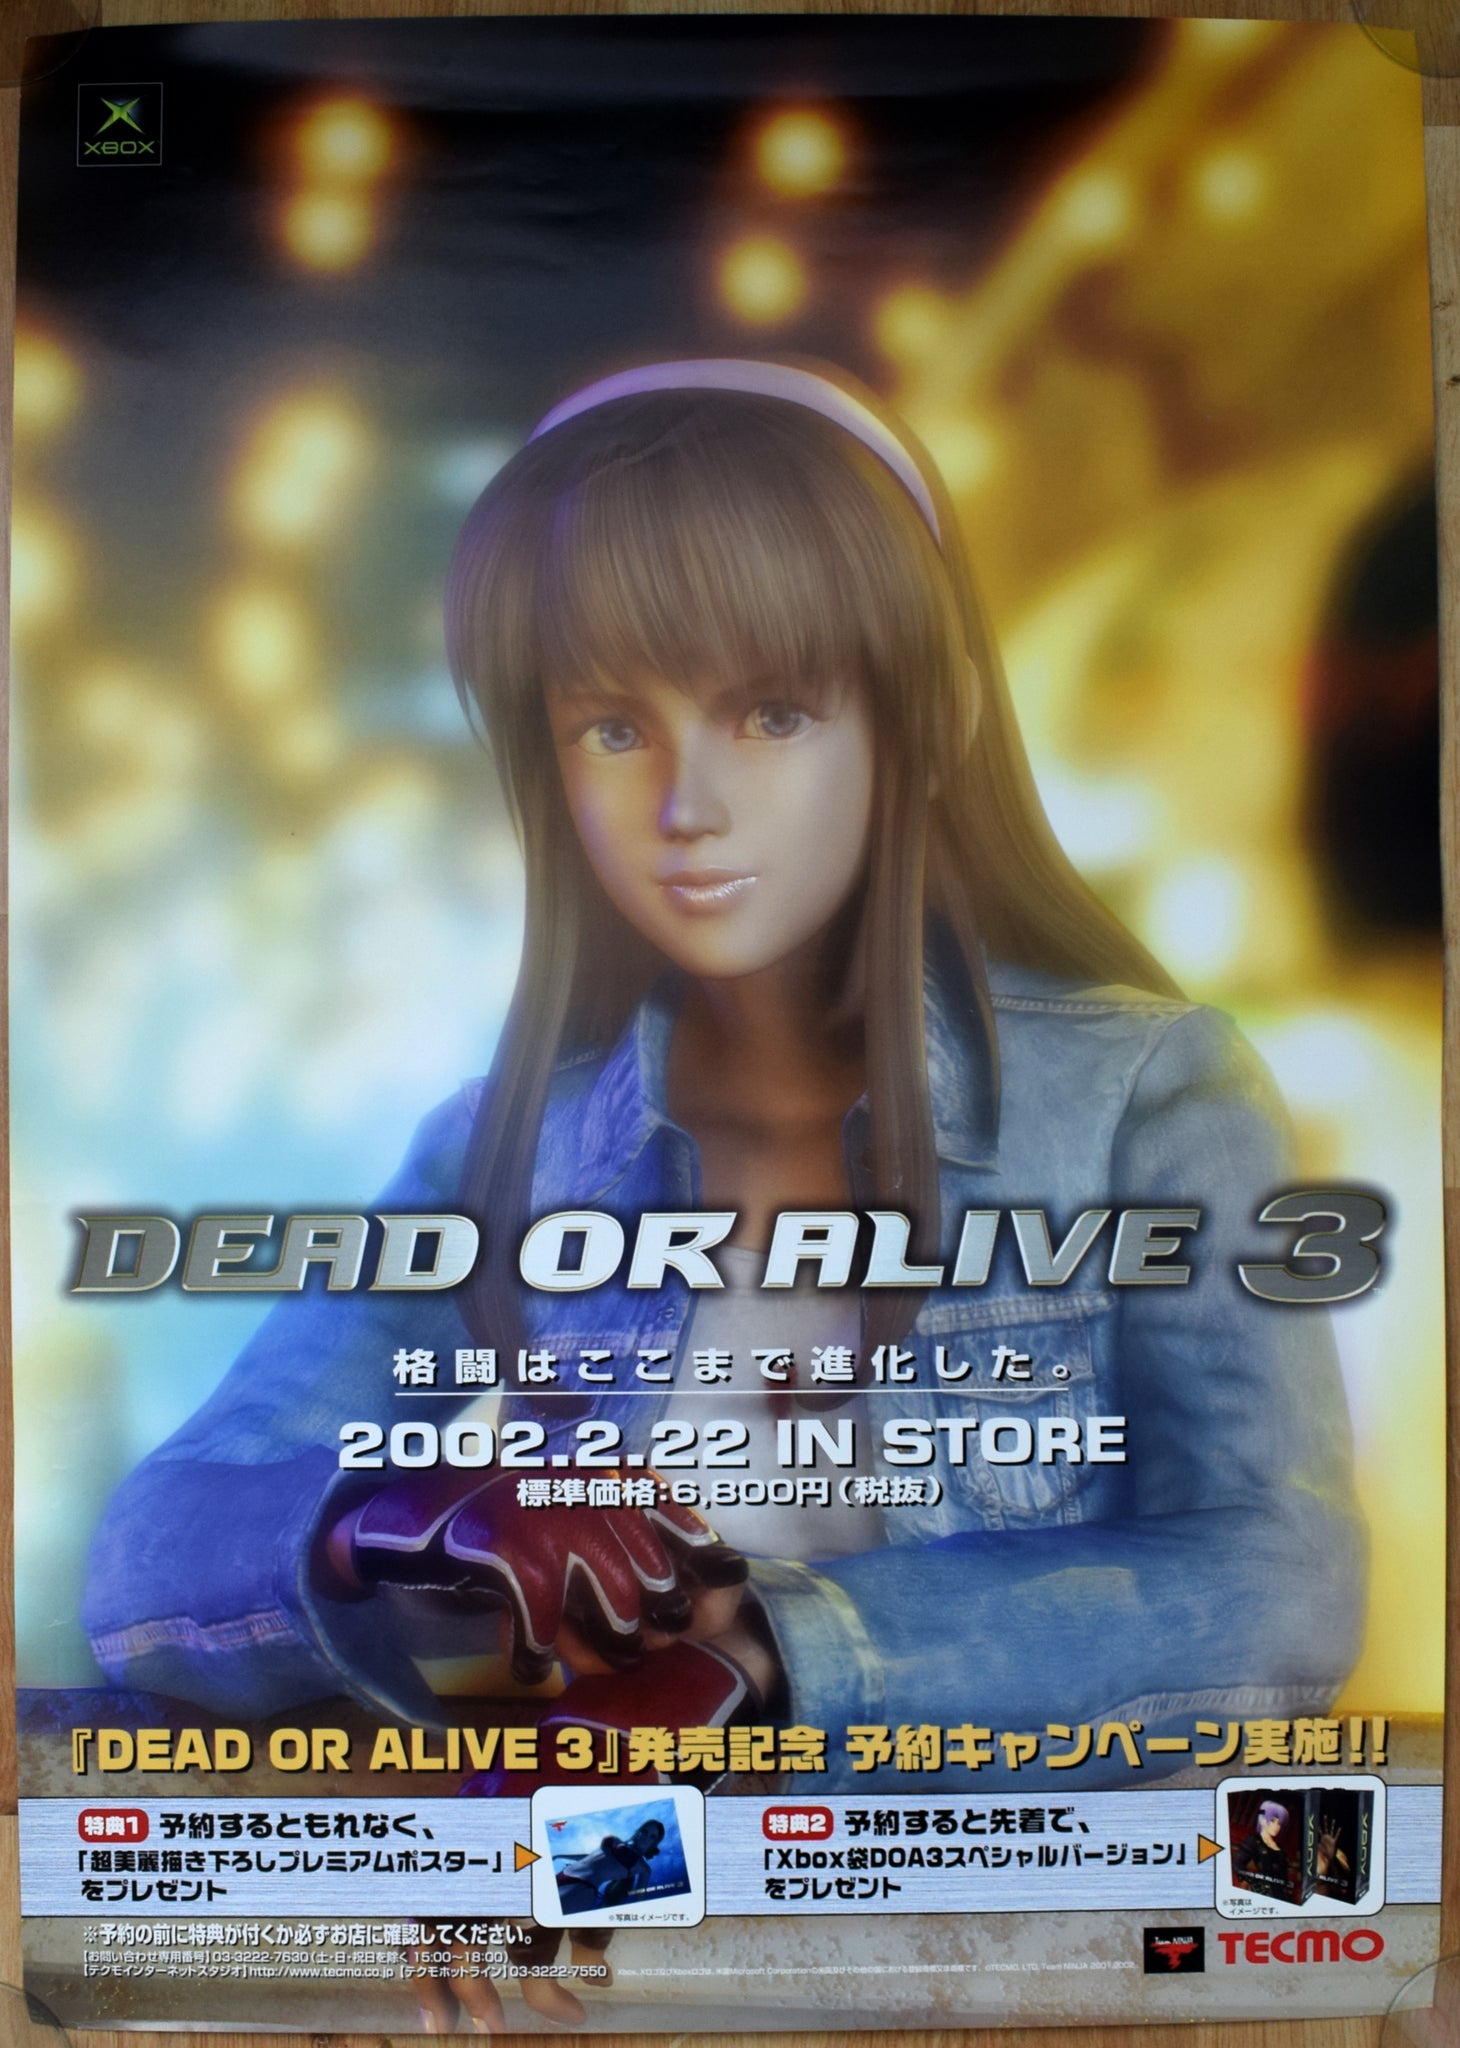 Dead or Alive 3 (B2) Japanese Promotional Poster #1